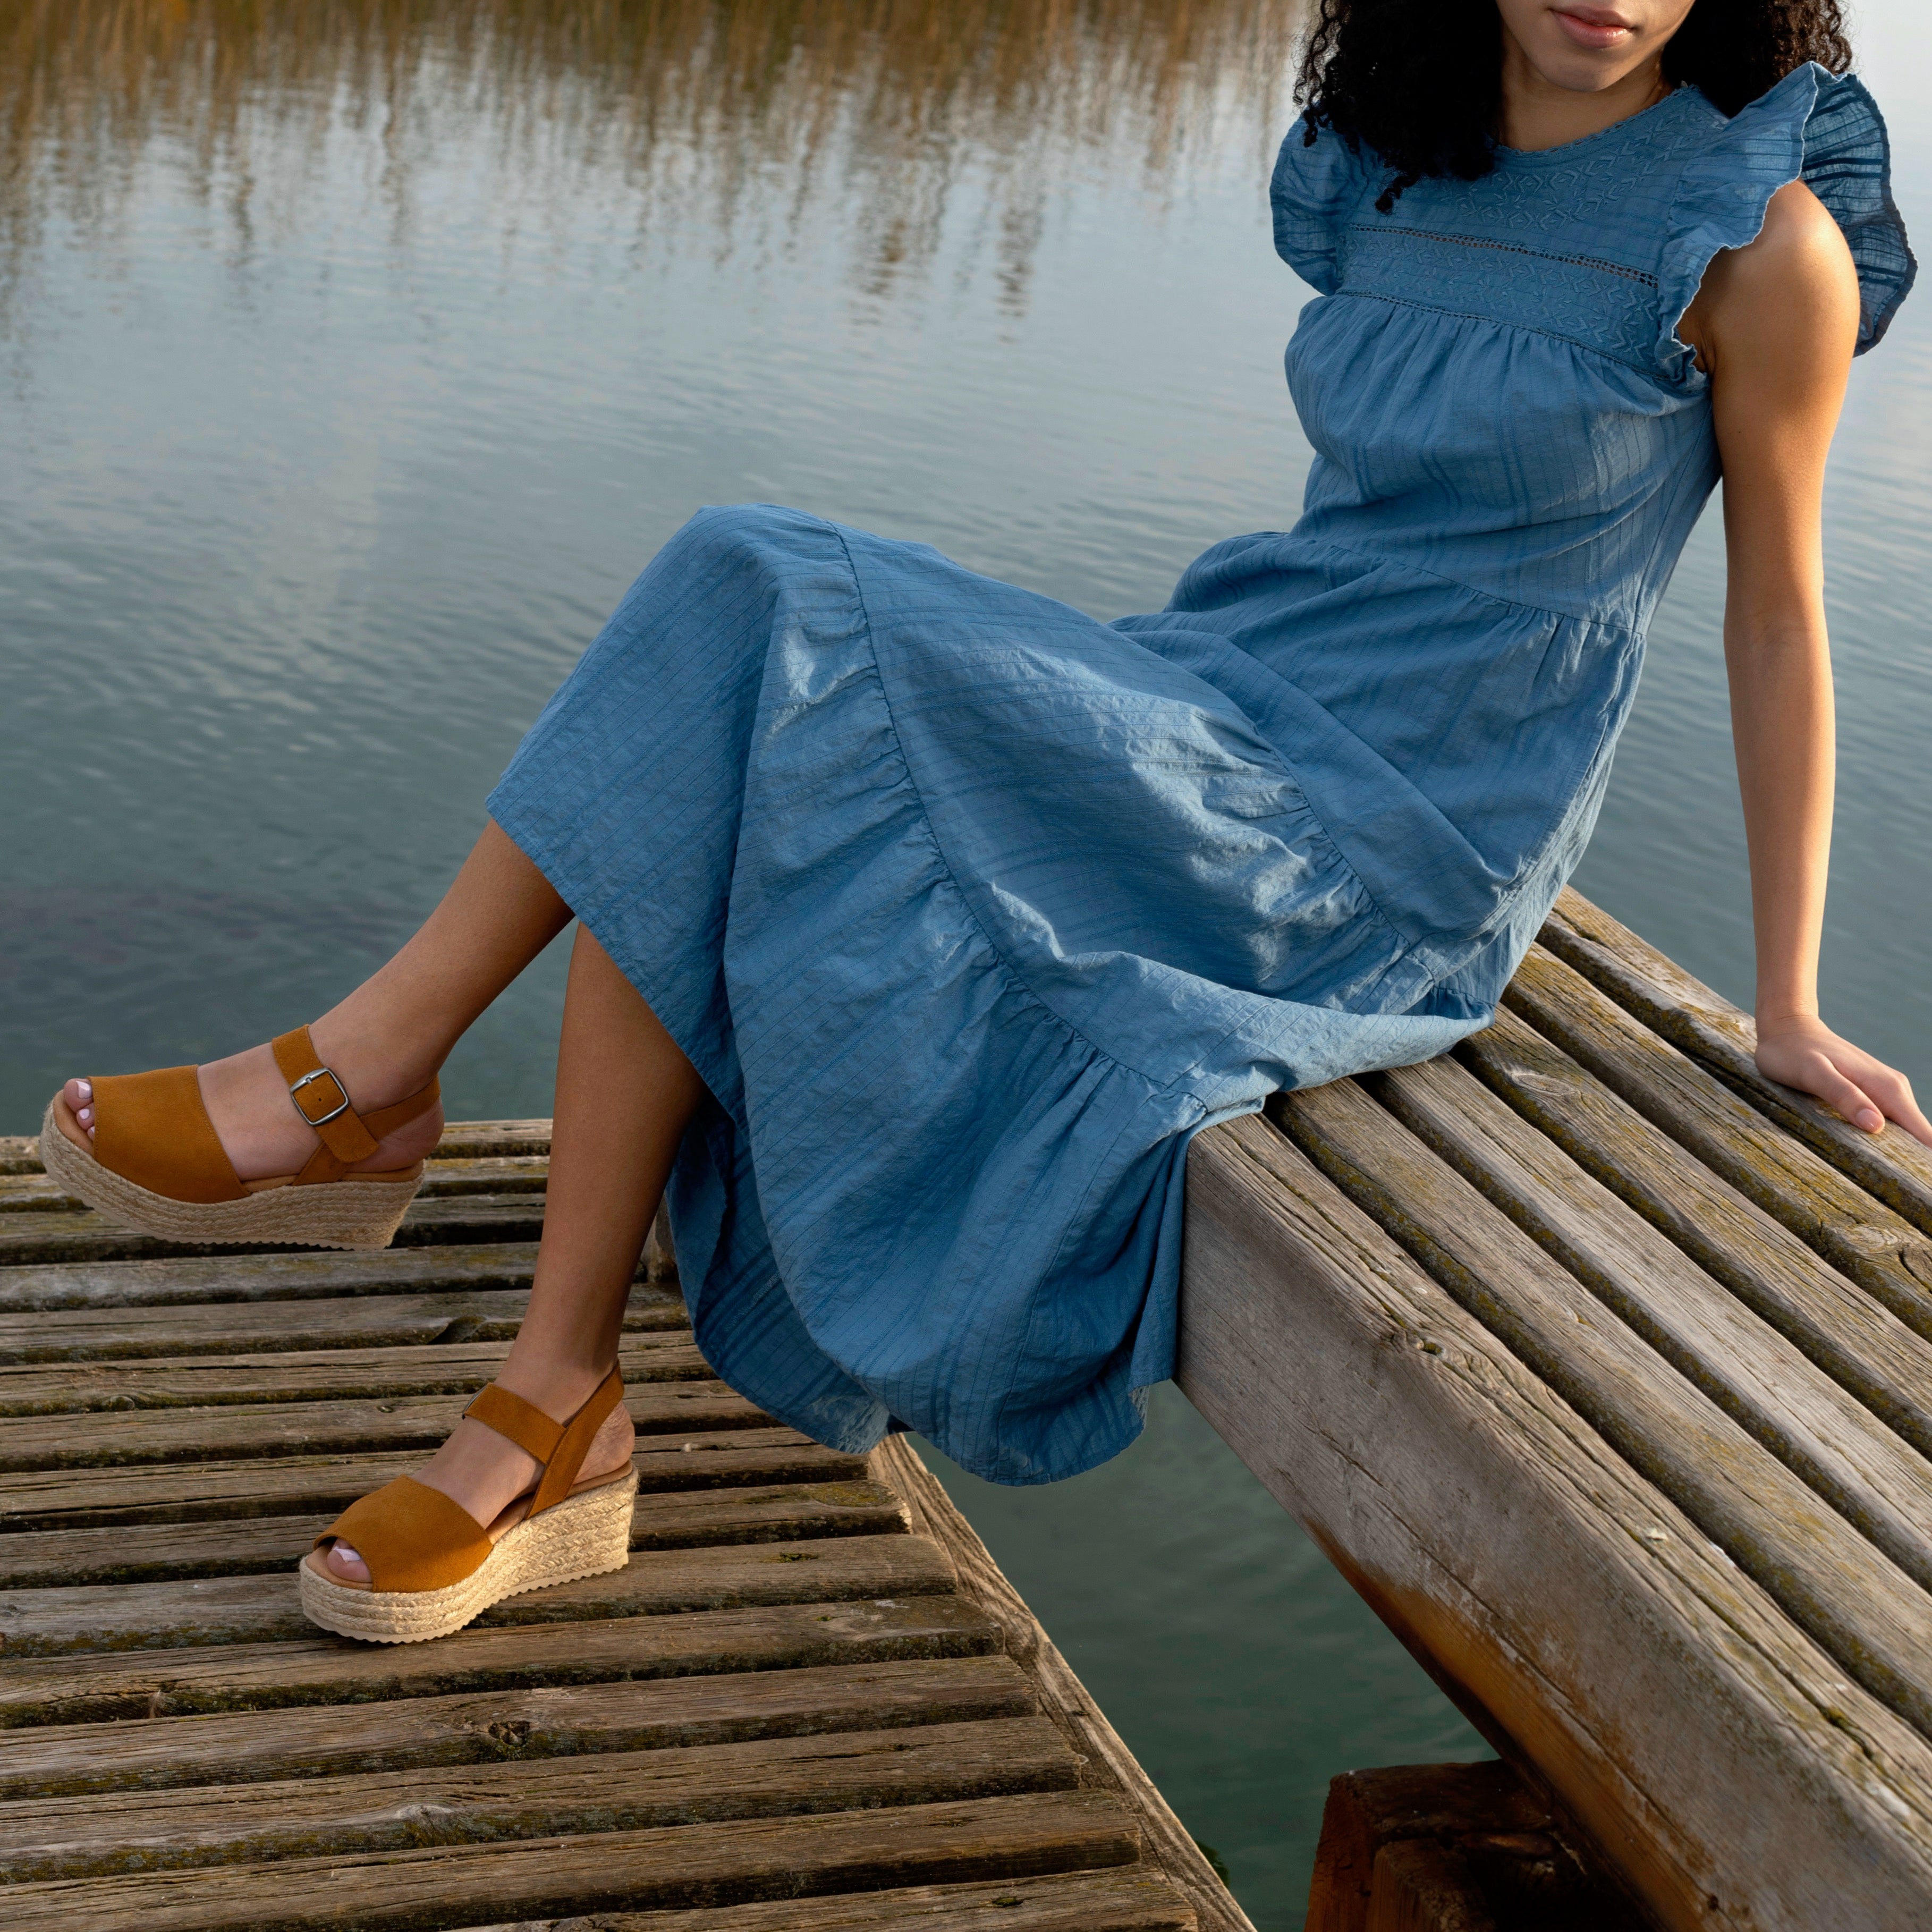 woman sitting by a like wearing a blue dress and platform sandals in whiskey color